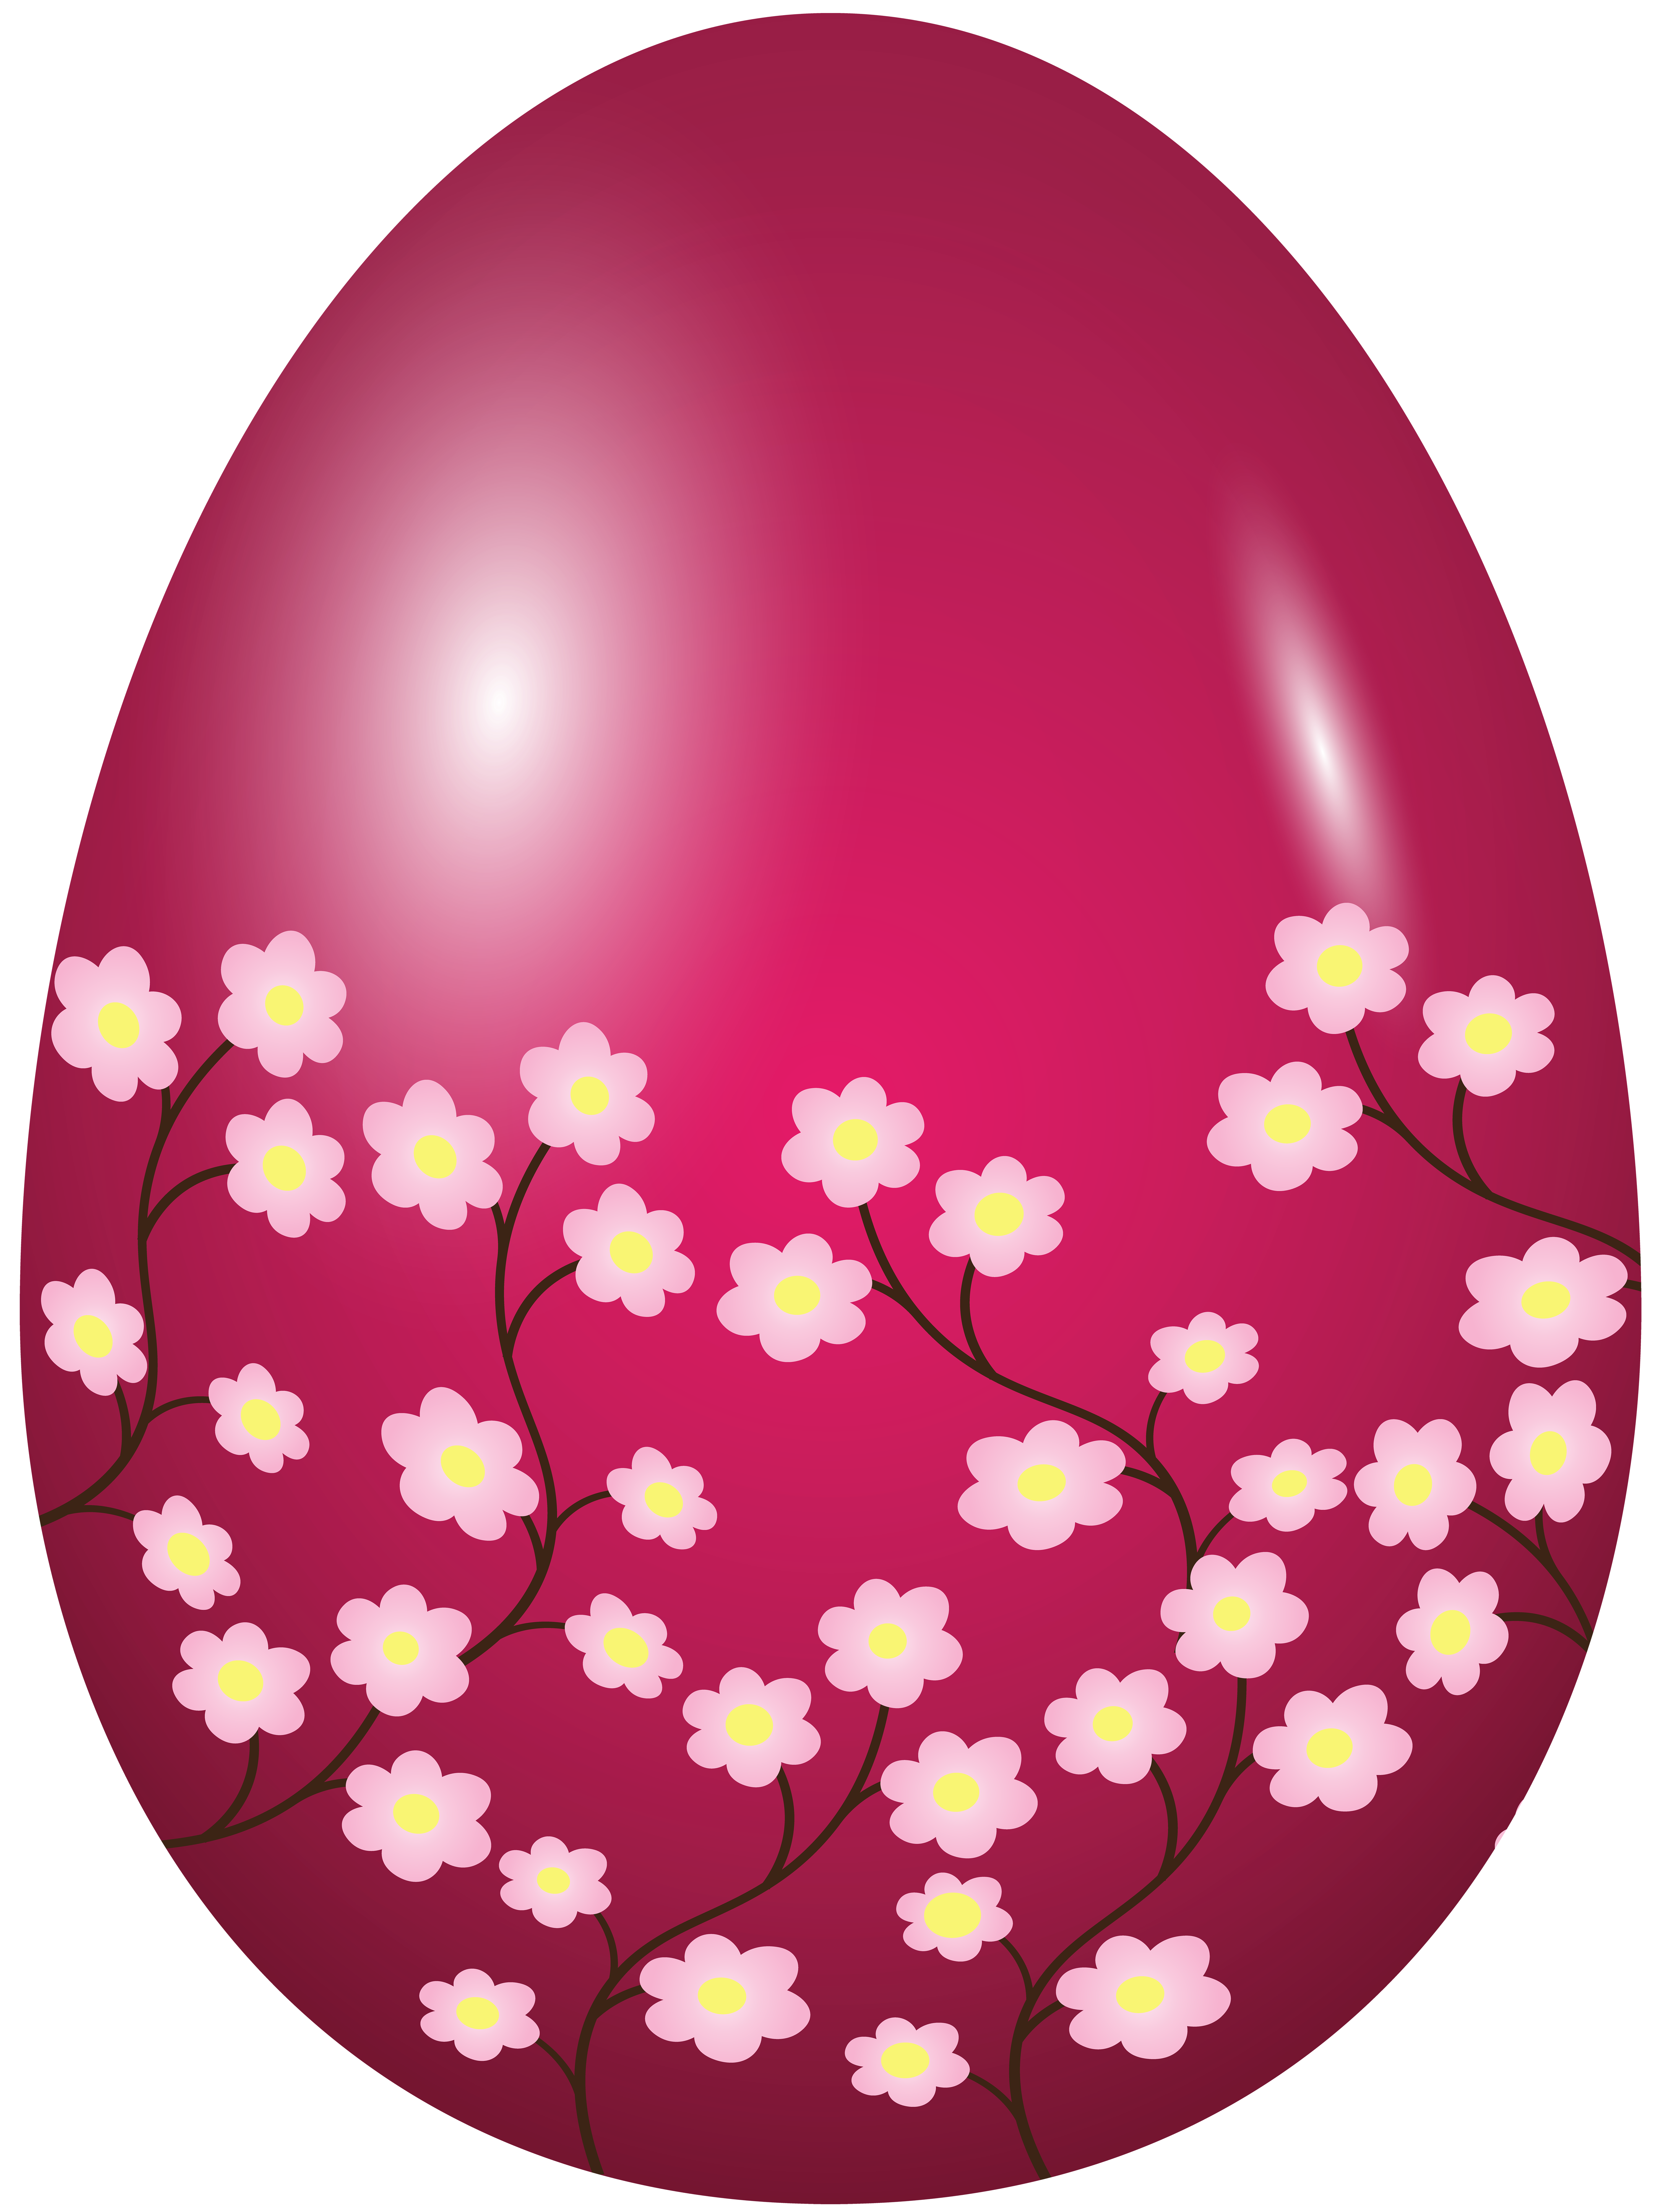 Piano clipart spring. Easter egg pink clip